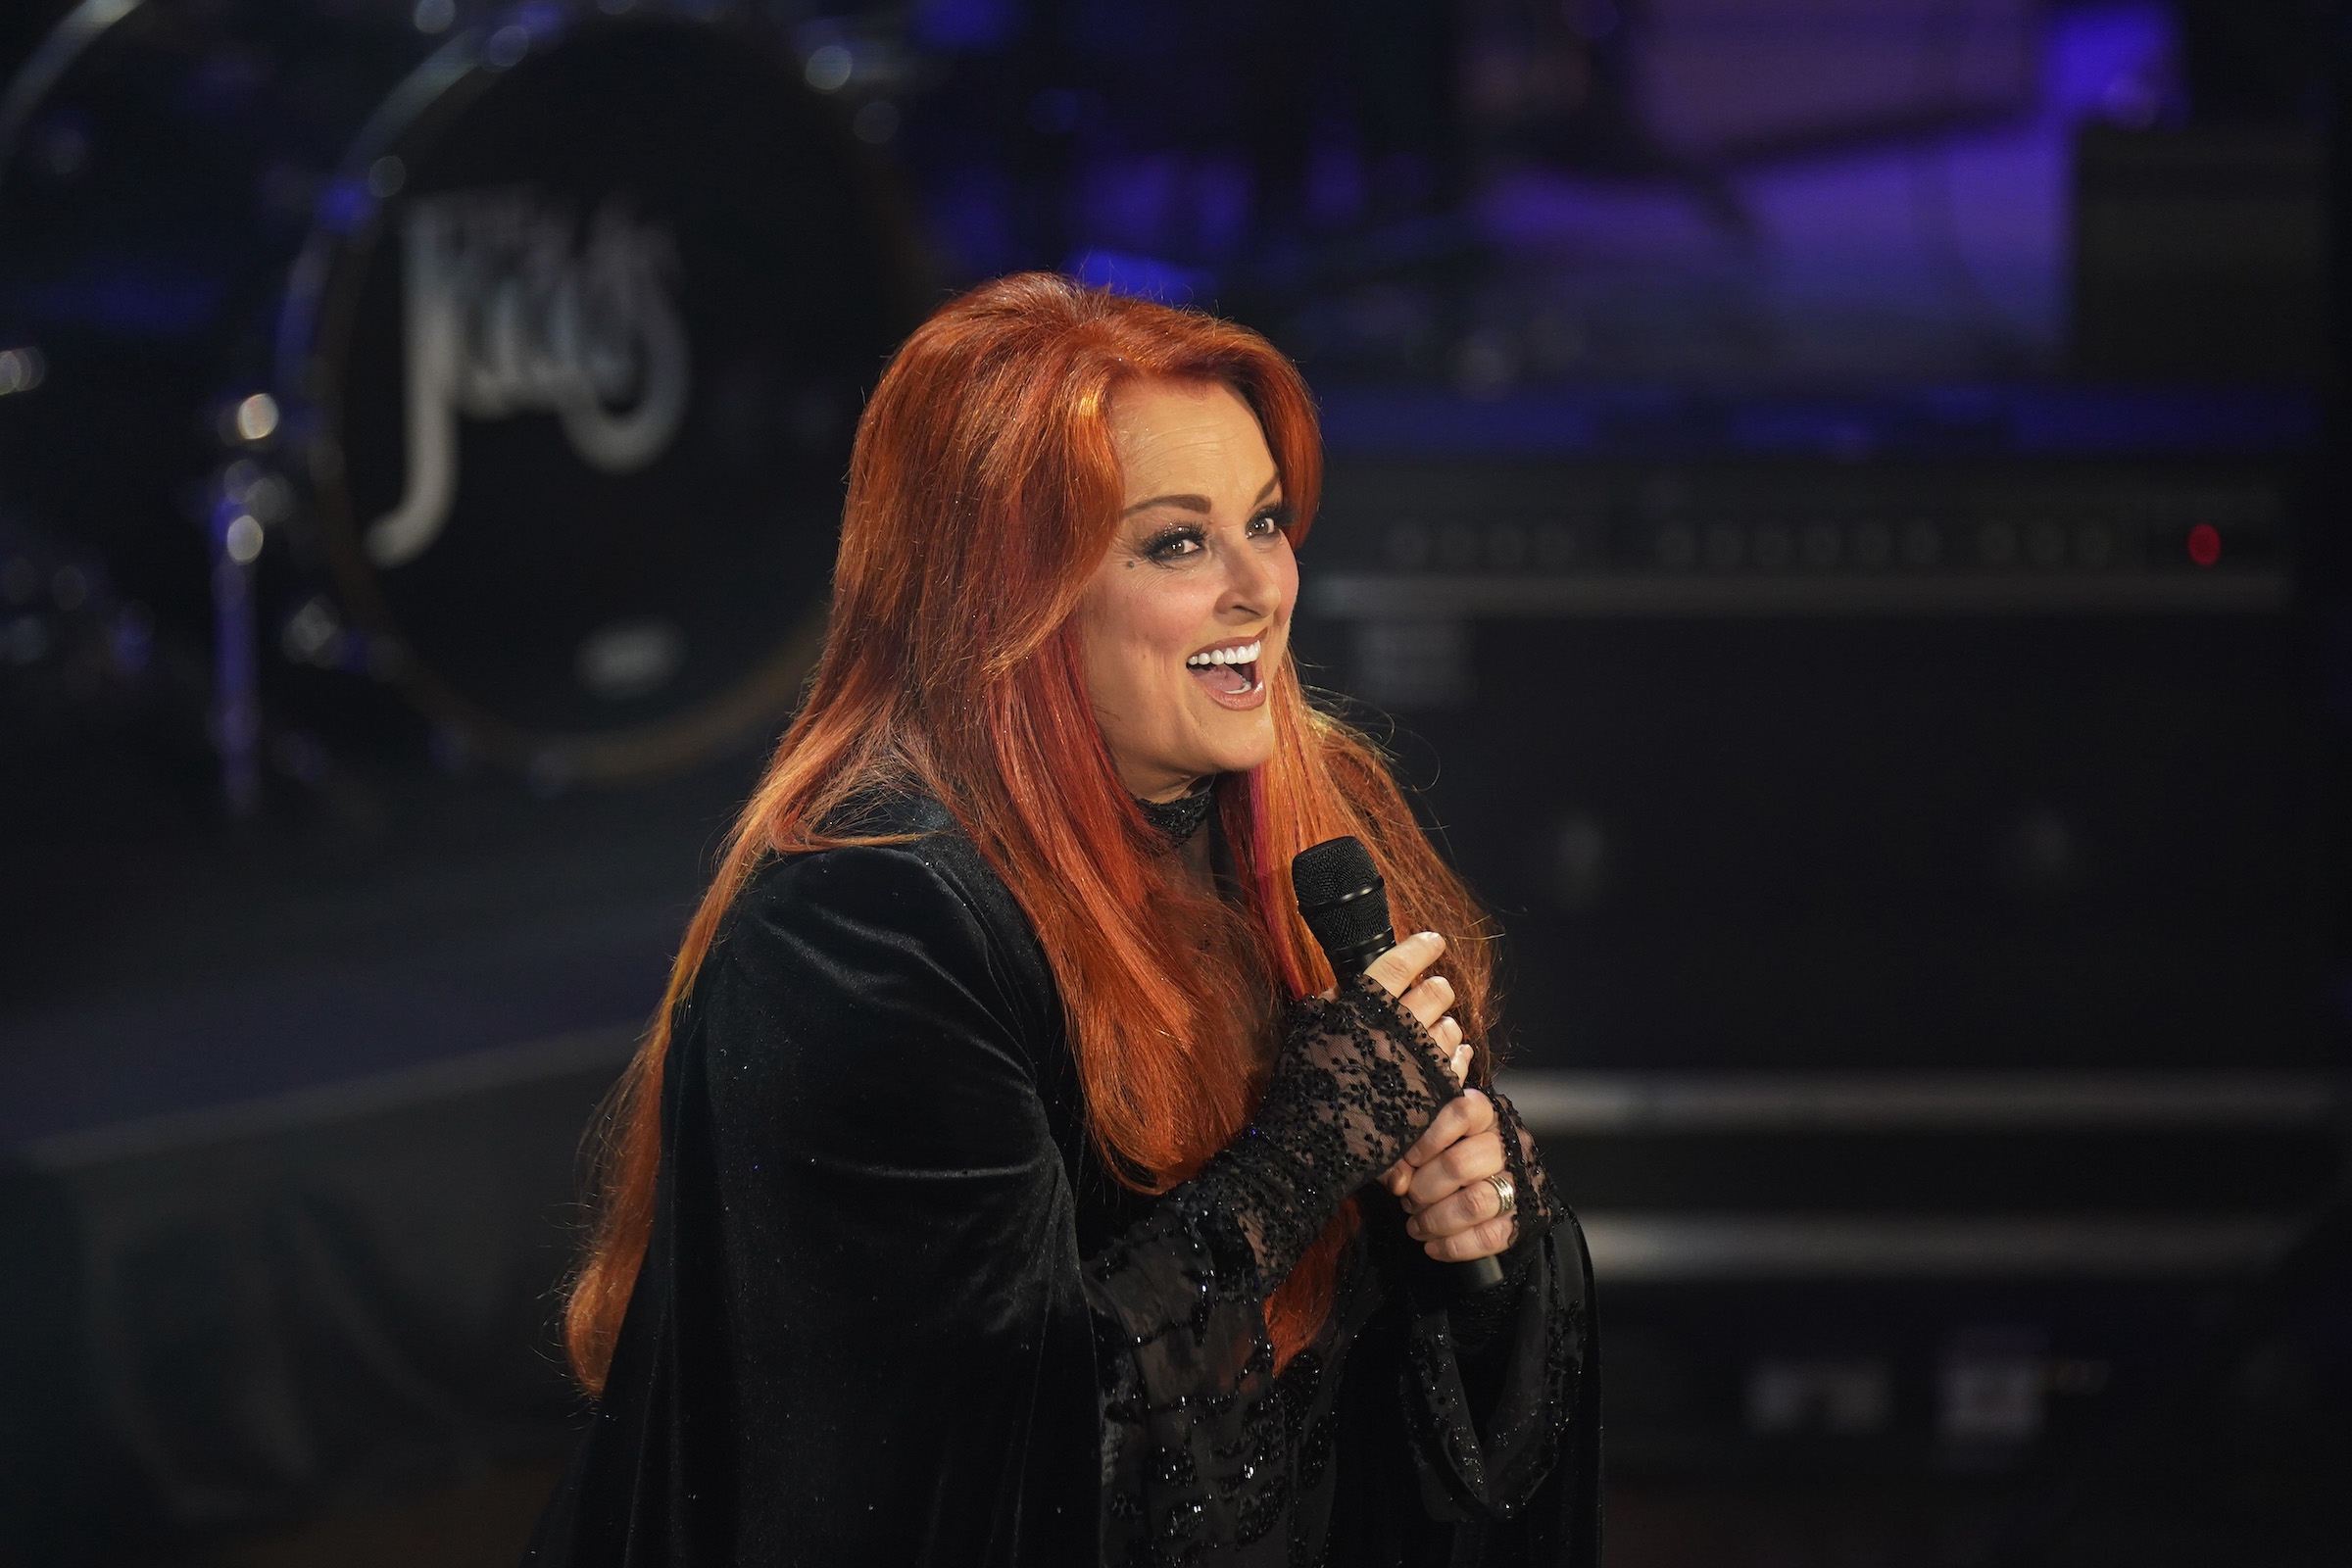 The Judds singer Wynonna Judd, who will be going on tour representing The Judds, performing wearing black